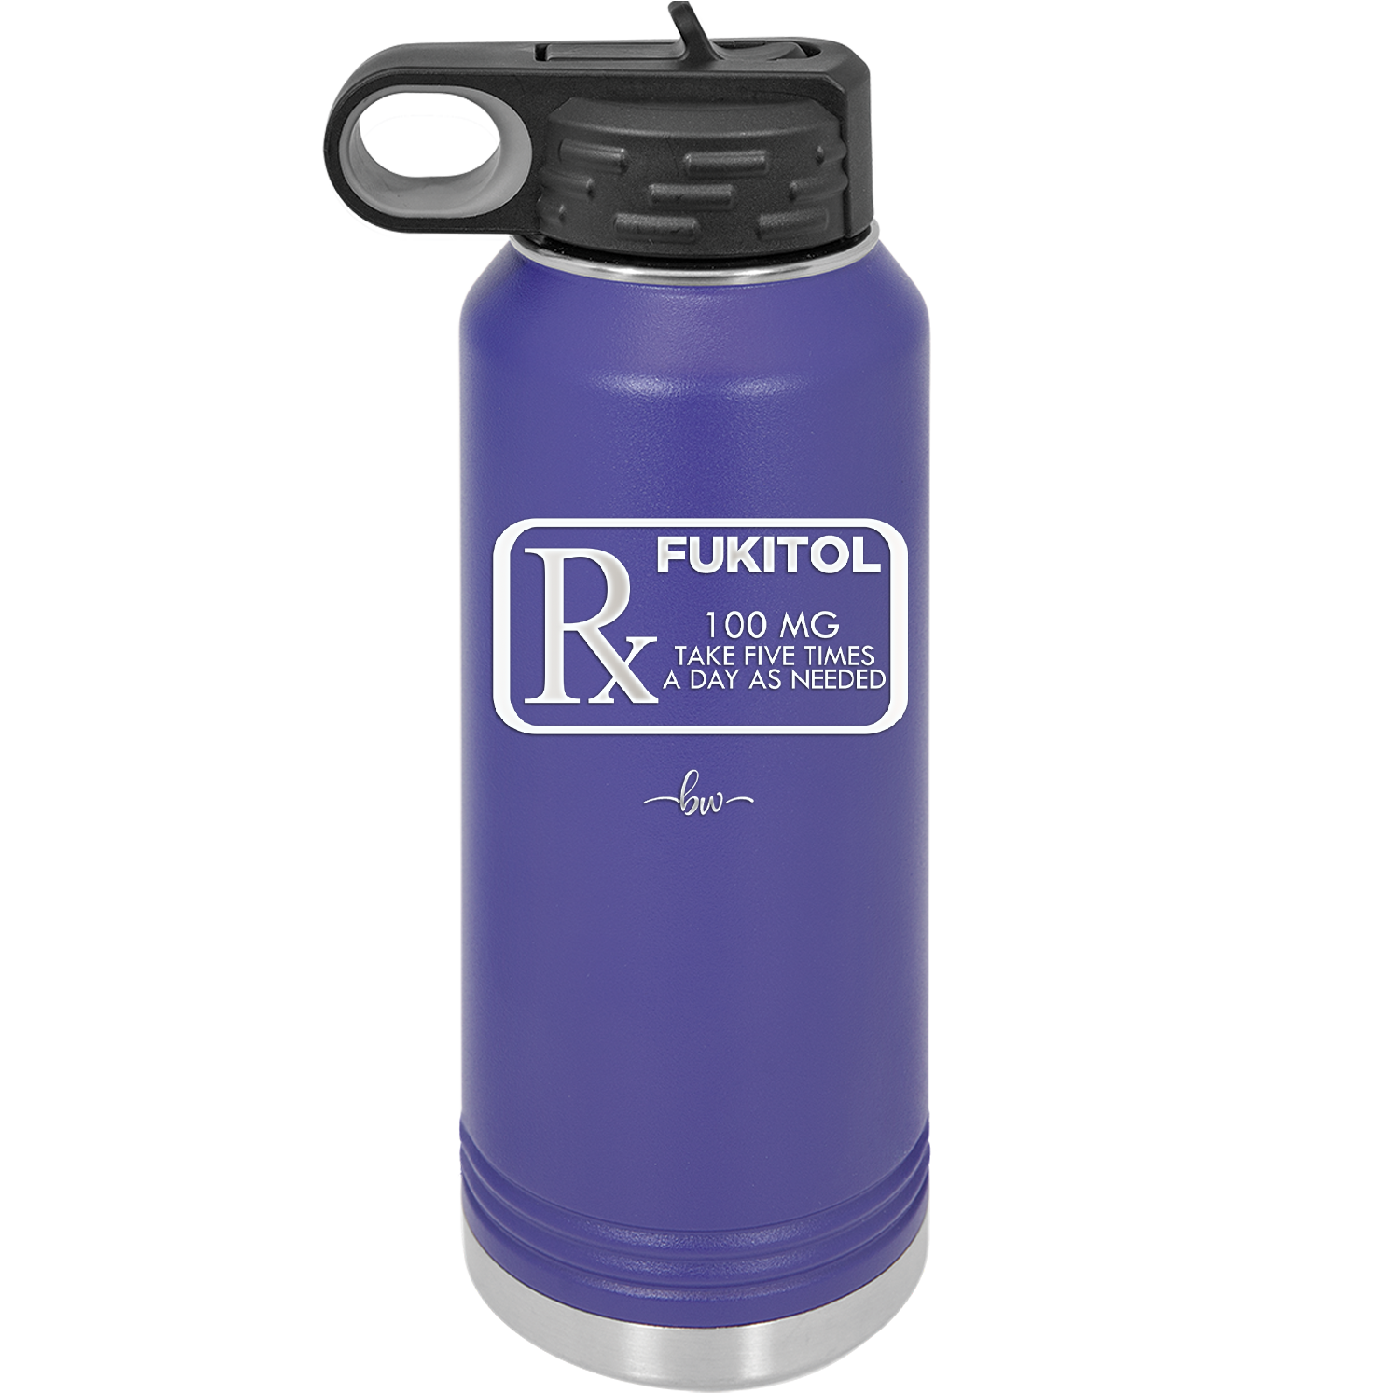 RX Fukitol 100MG 5x a Day - Laser Engraved Stainless Steel Drinkware - 2493 -